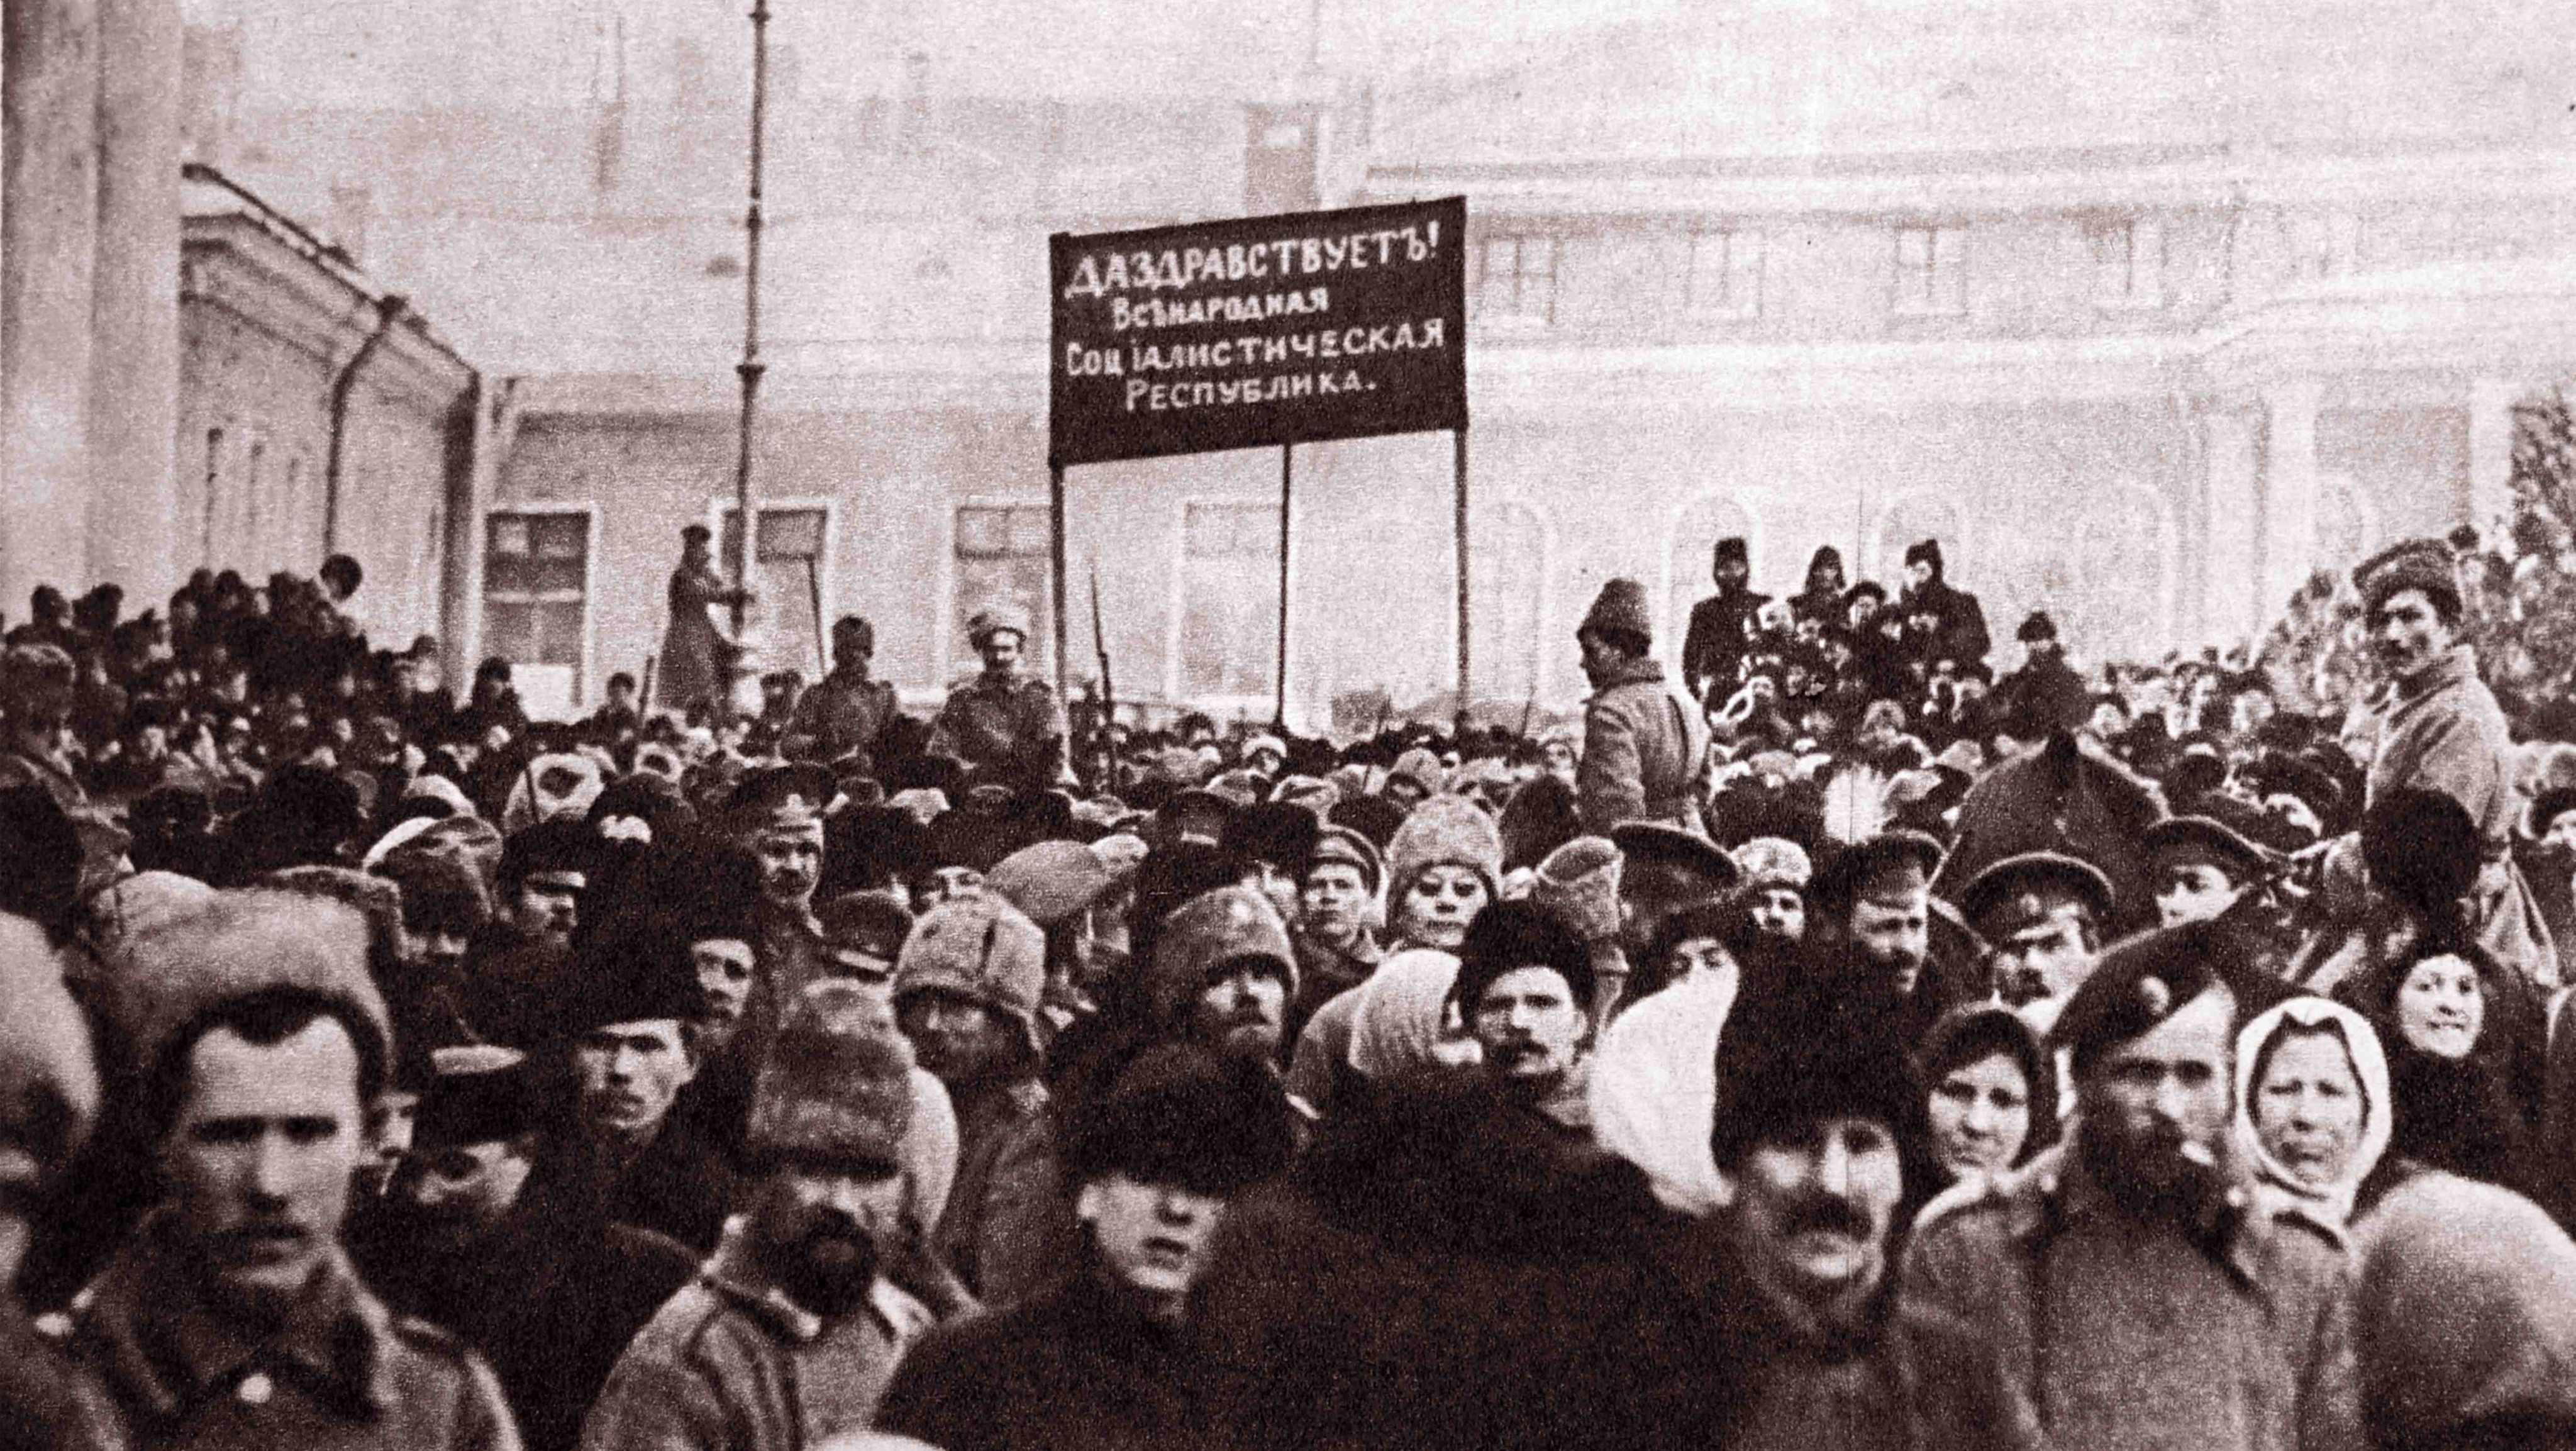 At the State Duma in the early days of the February Revolution.